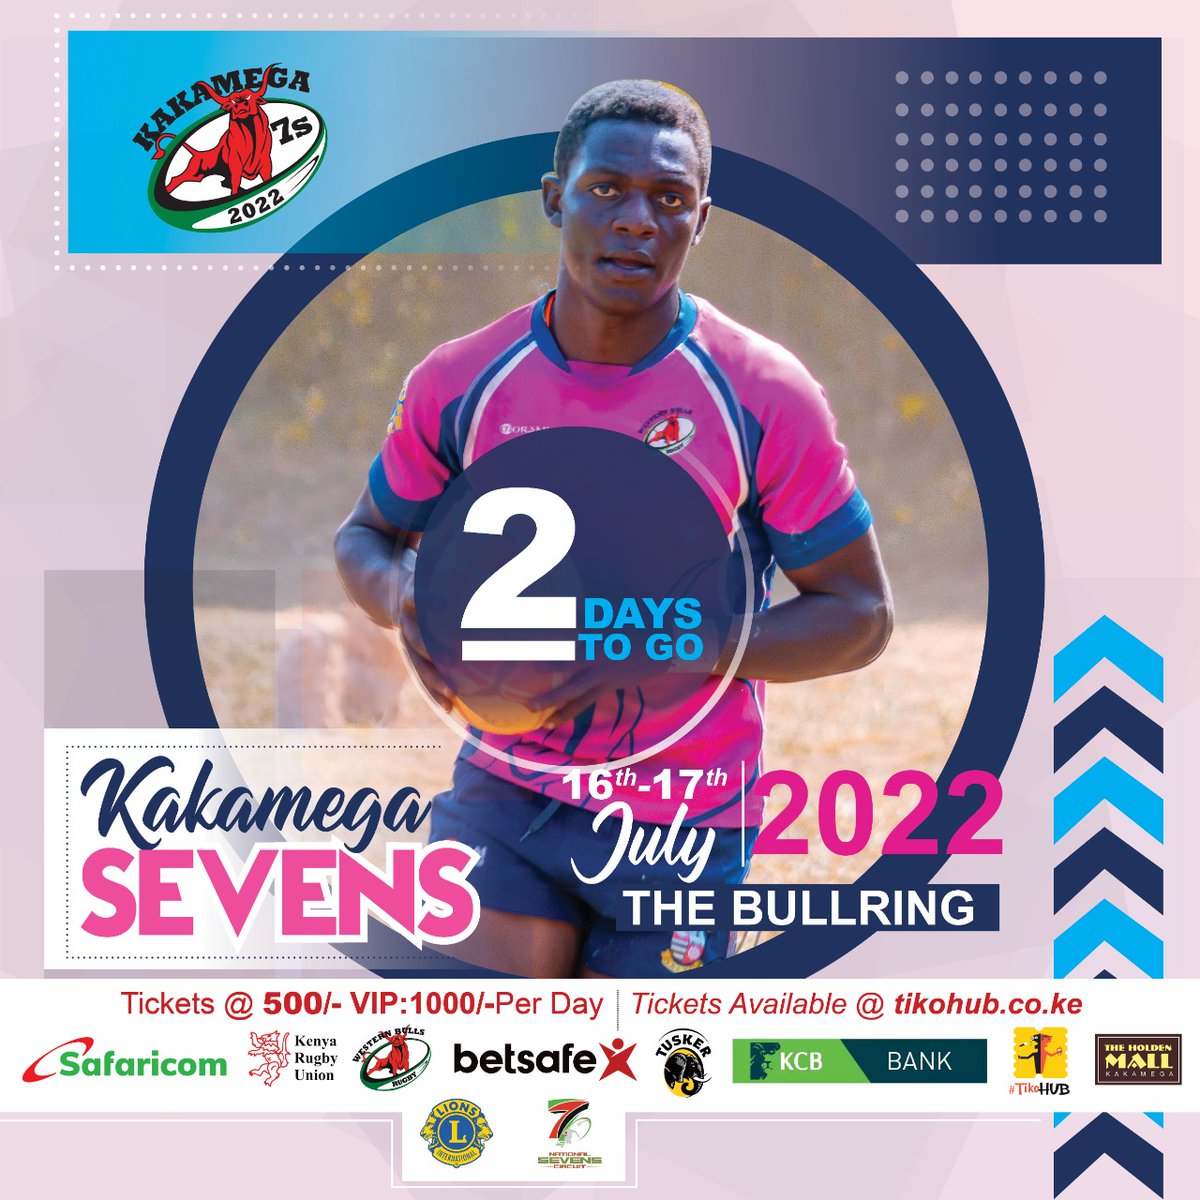 Goodmorning Rugby fans! Just 2️⃣ more days before the #Kakamega7s! Make sure you have your tickets! tikohub.co.ke/resources/even…